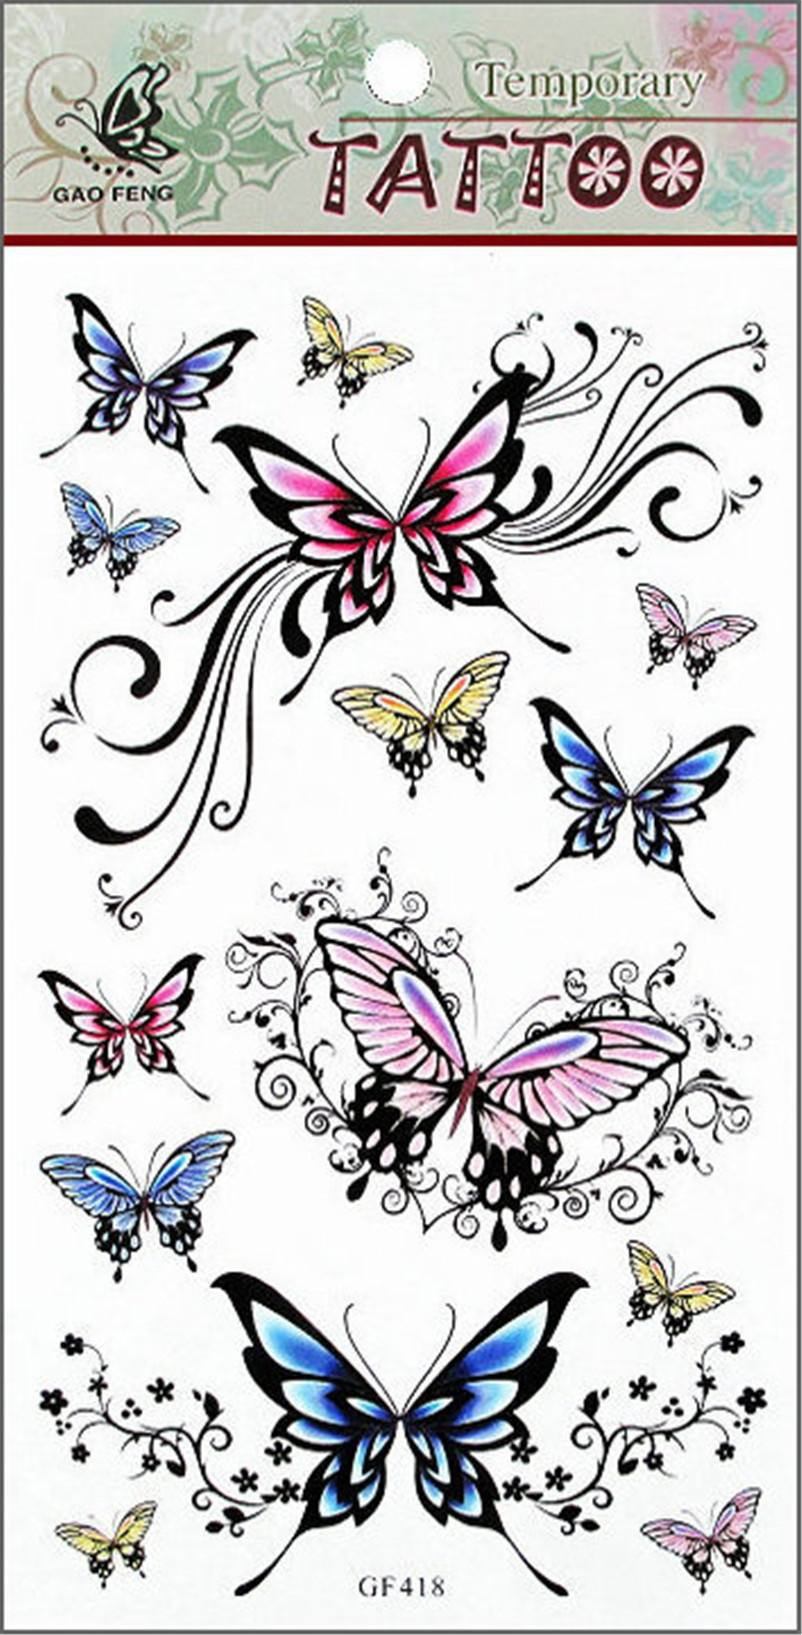 Fashion Removable Waterproof Temporary Tattoo Butterfly Tattoos Fake for measurements 802 X 1635